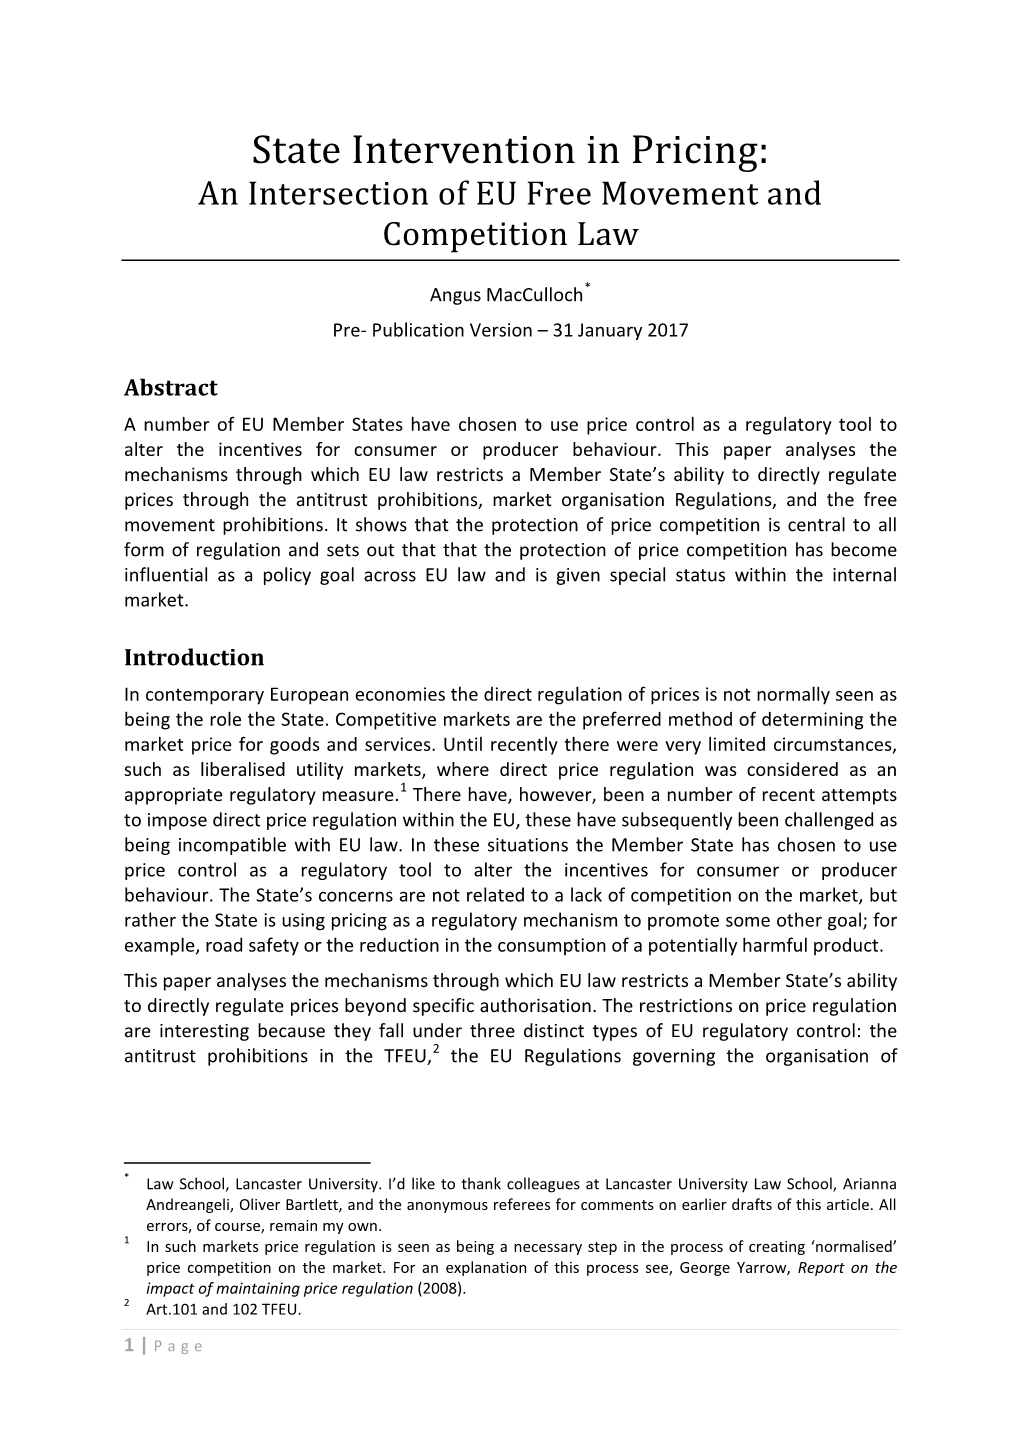 State Intervention in Pricing: an Intersection of EU Free Movement and Competition Law